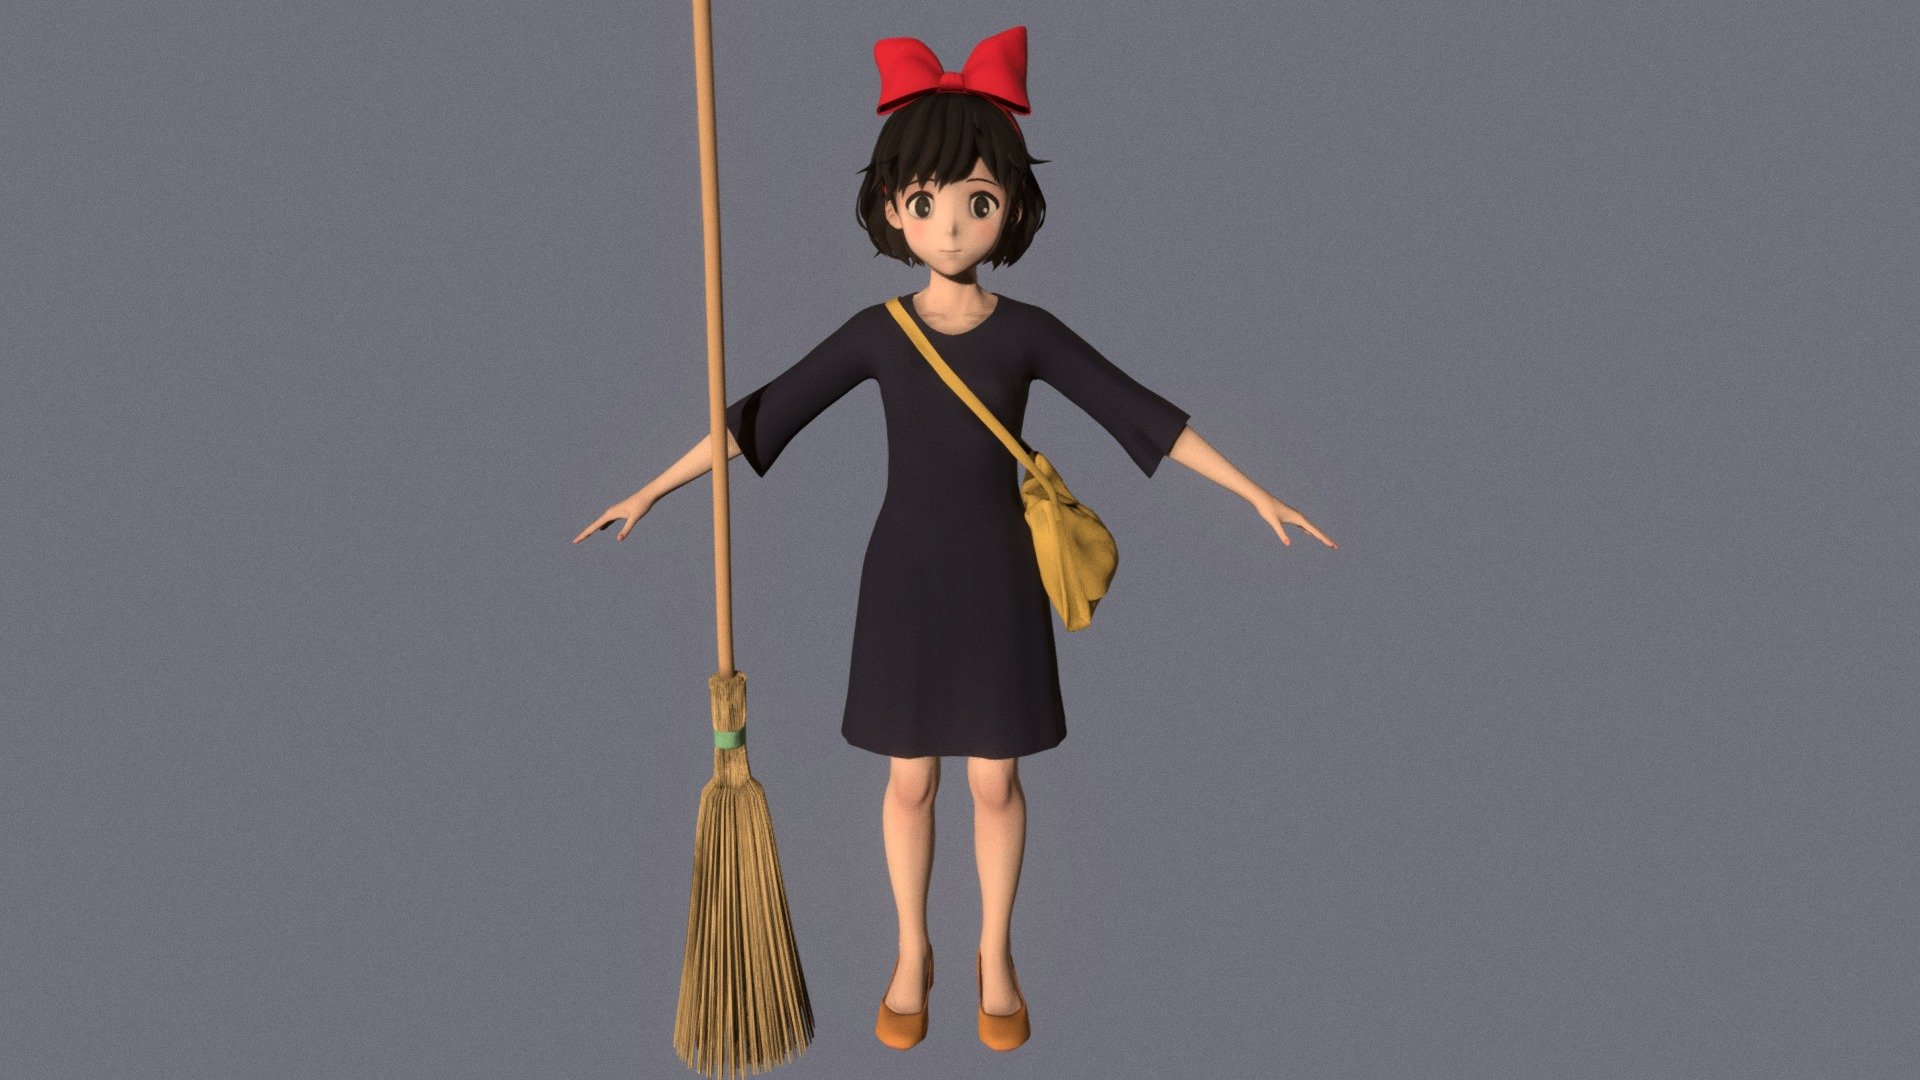 T-pose rigged model of anime girl Kiki (Kiki’s Delivery Service).

Body and clothings are rigged and skinned by 3ds Max CAT system.

Eye direction and facial animation controlled by Morpher modifier / Shape Keys / Blendshape.

This product include .FBX (ver. 7200) and .MAX (ver. 2010) files.

3ds Max version is turbosmoothed to give a high quality render (as you can see here).

Original main body mesh have ~7.000 polys.

This 3D model may need some tweaking to adapt the rig system to games engine and other platforms.

I support convert model to various file formats (the rig data will be lost in this process): 3DS; AI; ASE; DAE; DWF; DWG; DXF; FLT; HTR; IGS; M3G; MQO; OBJ; SAT; STL; W3D; WRL; X.

You can buy all of my models in one pack to save cost: https://sketchfab.com/3d-models/all-of-my-anime-girls-c5a56156994e4193b9e8fa21a3b8360b

And I can make commission models.

If you have any questions, please leave a comment or contact me via my email 3d.eden.project@gmail.com 3d model